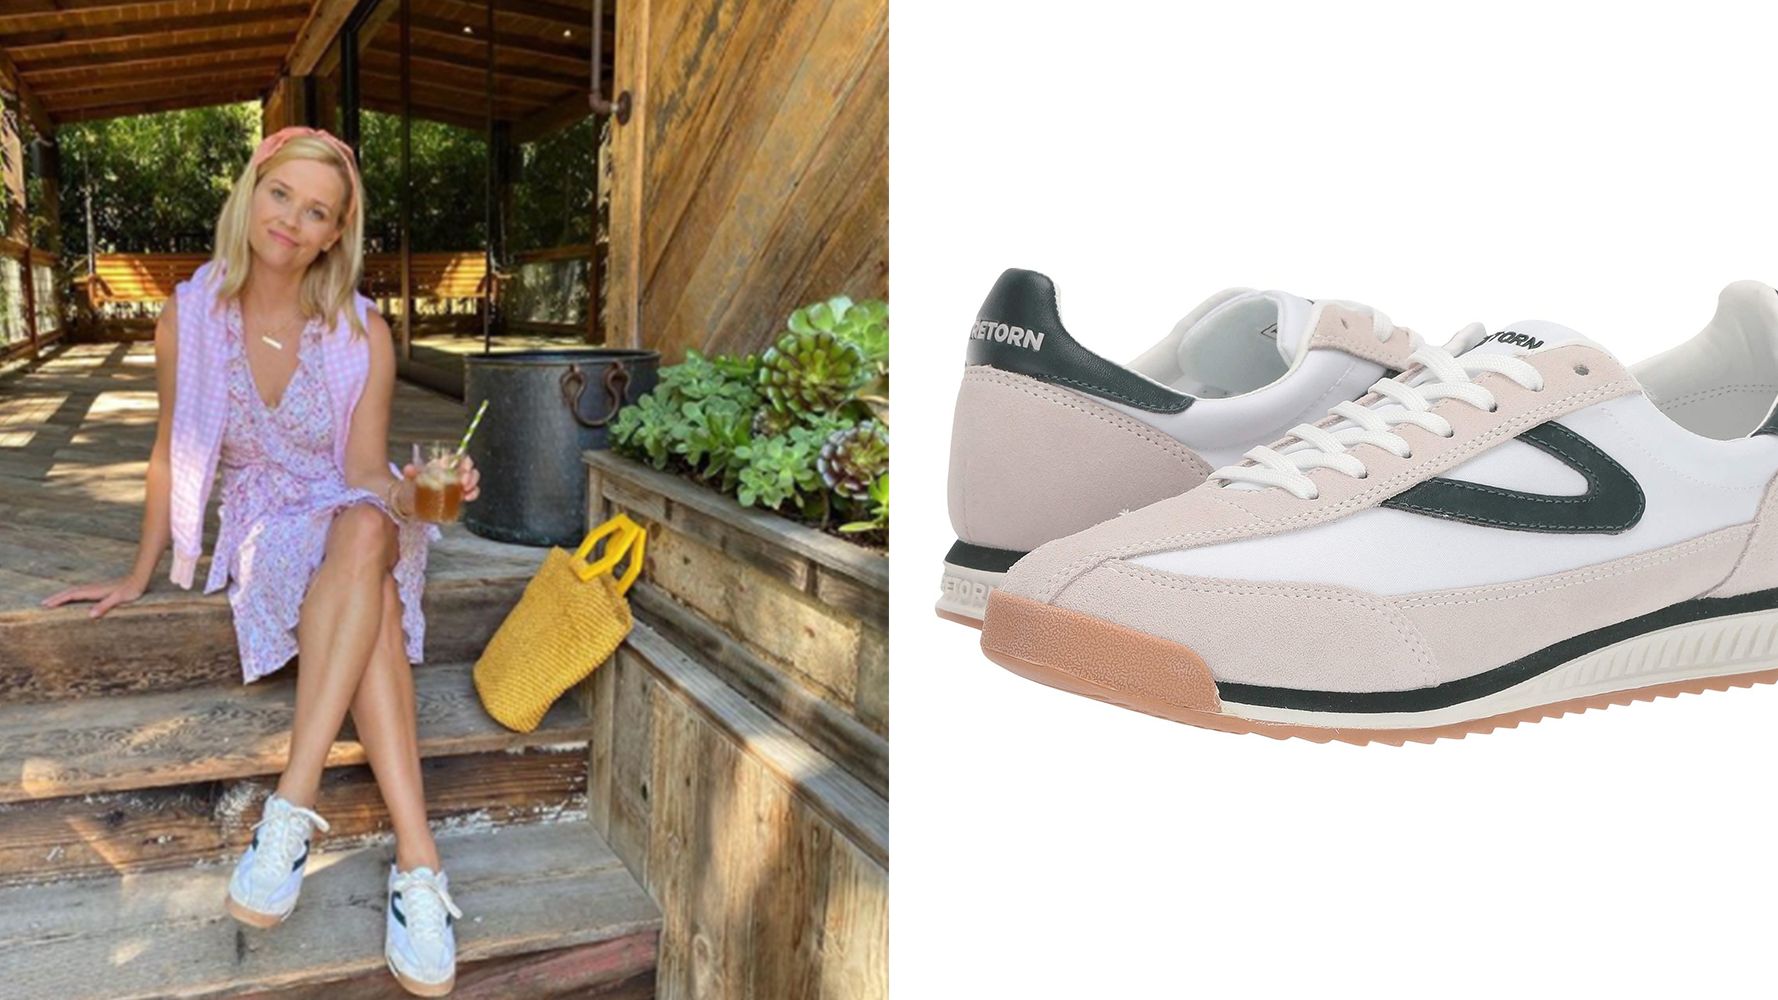 Reese Witherspoon Swears by These Tretorn Sneakers for Under $100